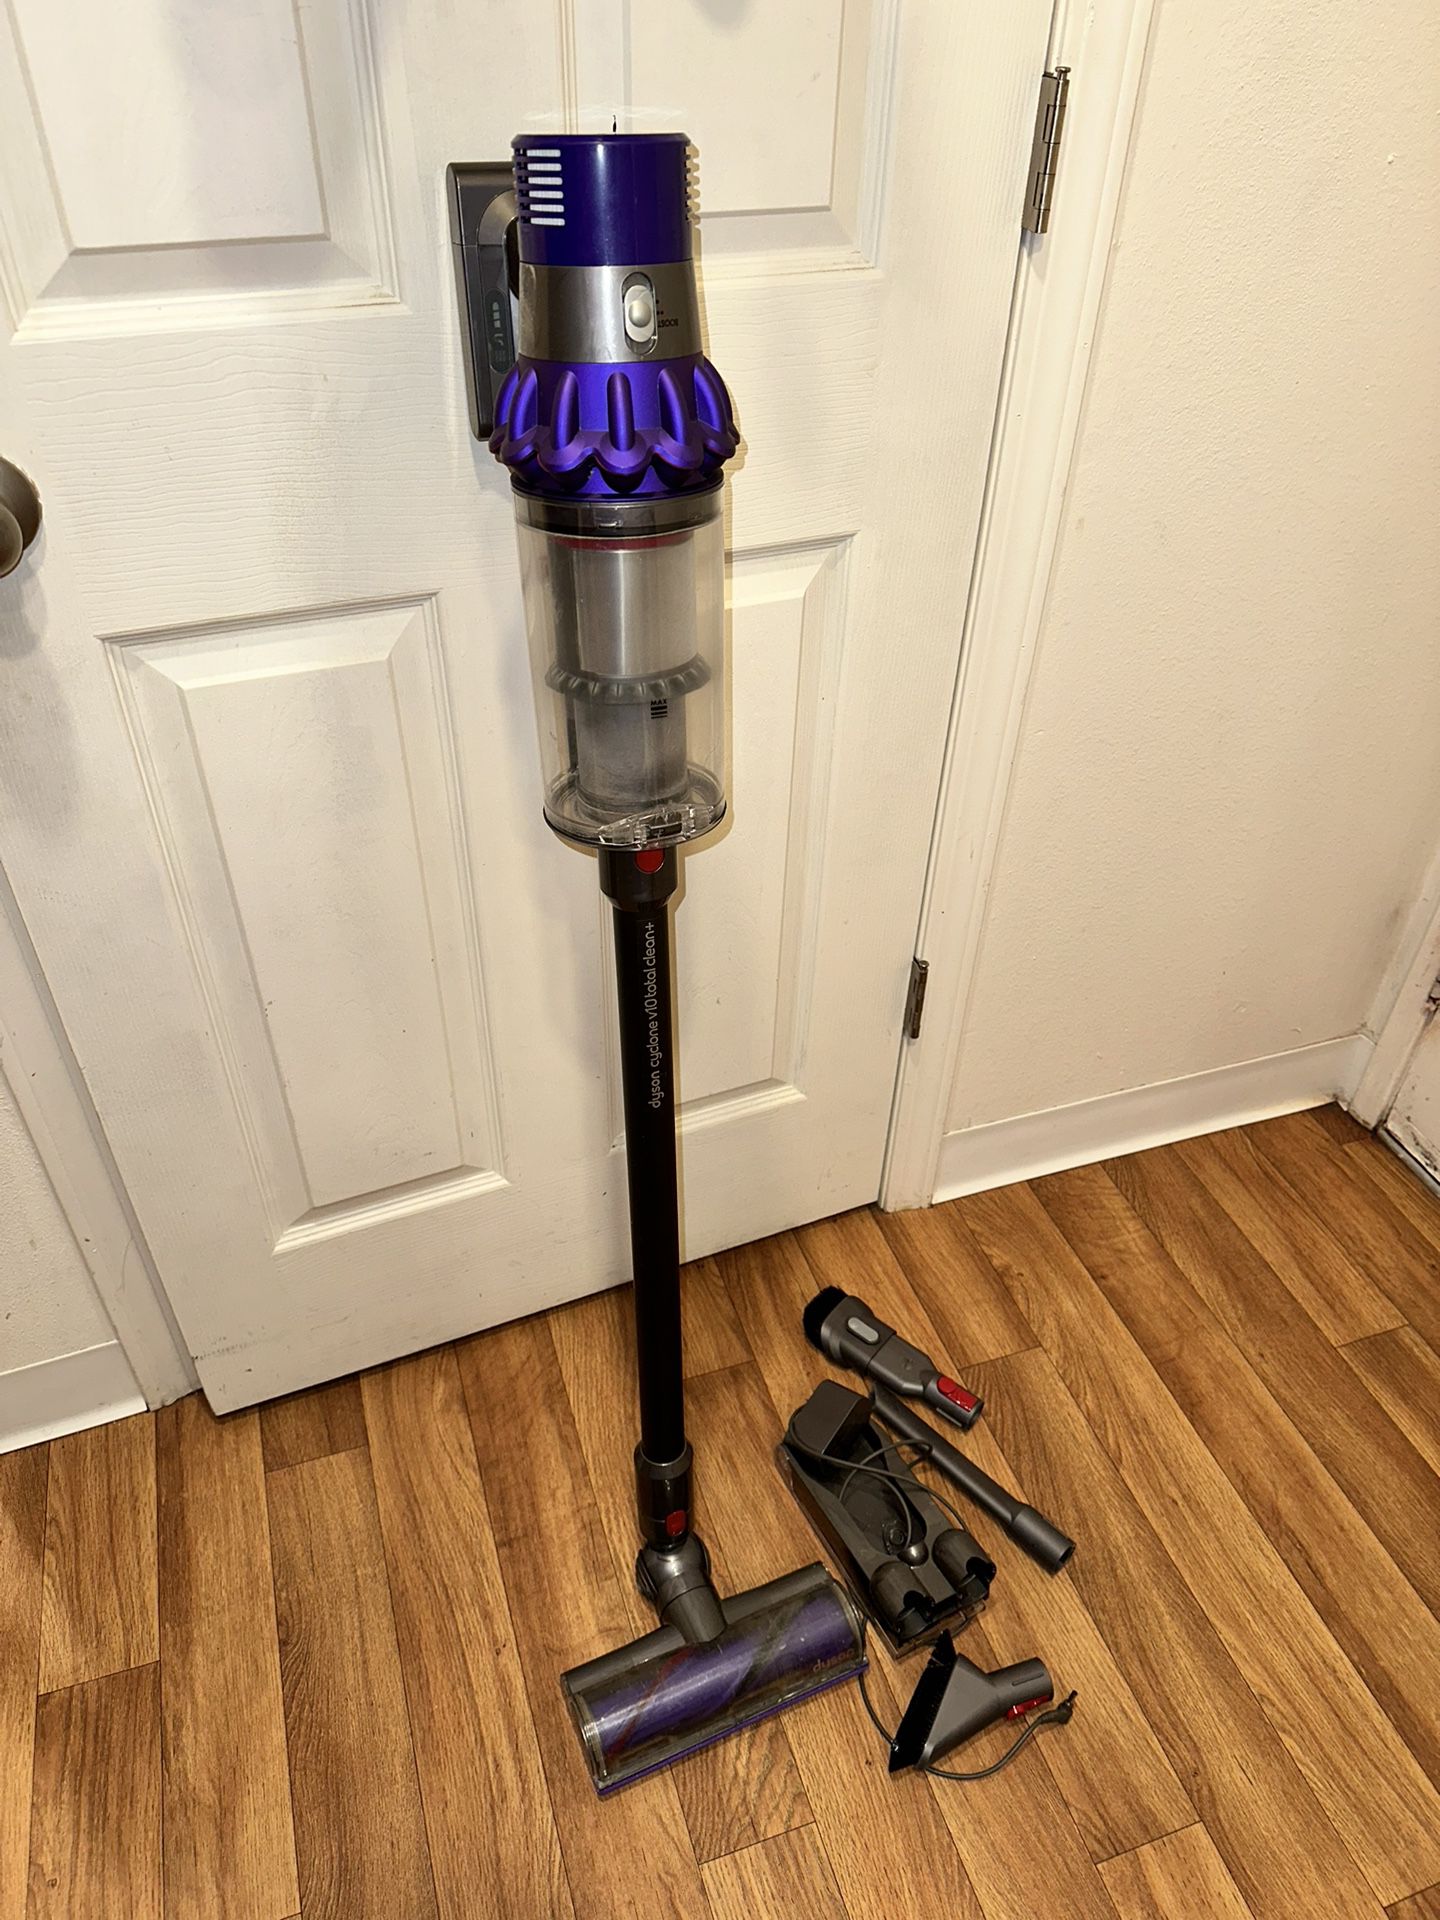 Dyson V10 Cyclone. Very Good Condition  Asking $280